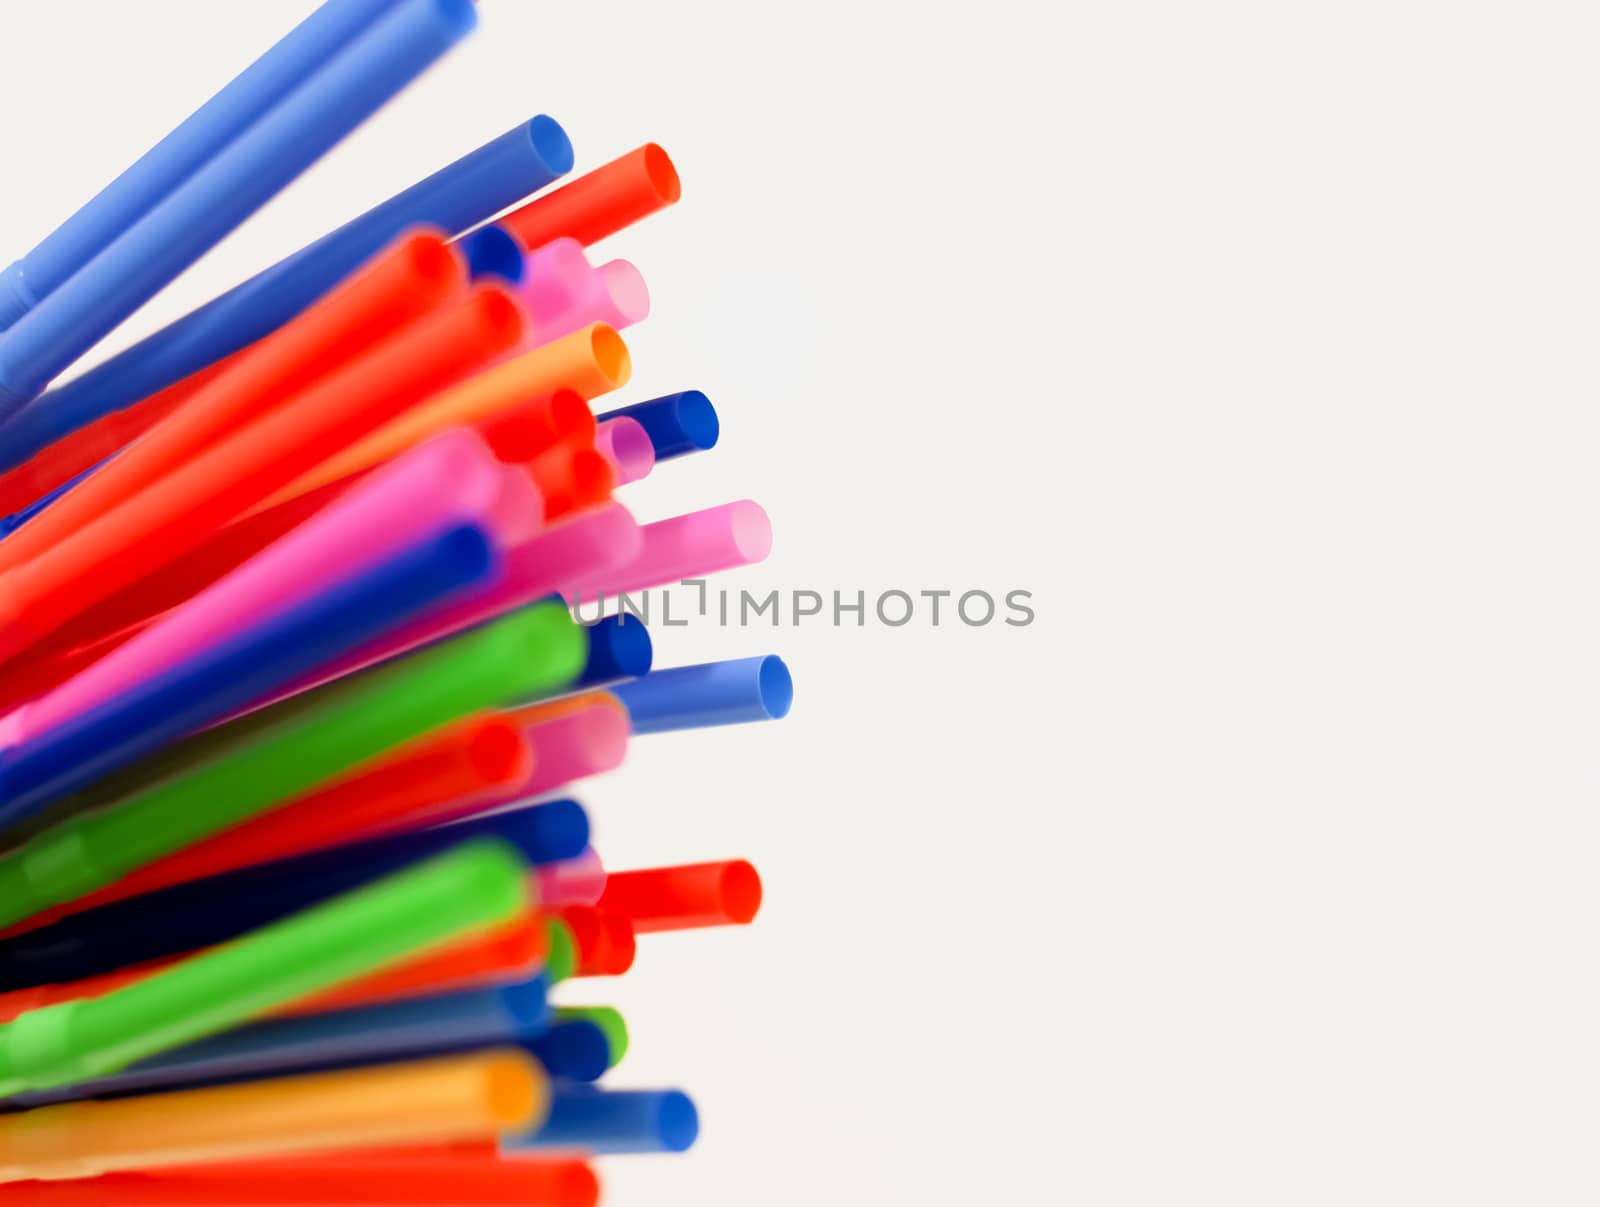 a group of colored plastic cocktail straws. Plastic and non-recyclable materials. by rarrarorro